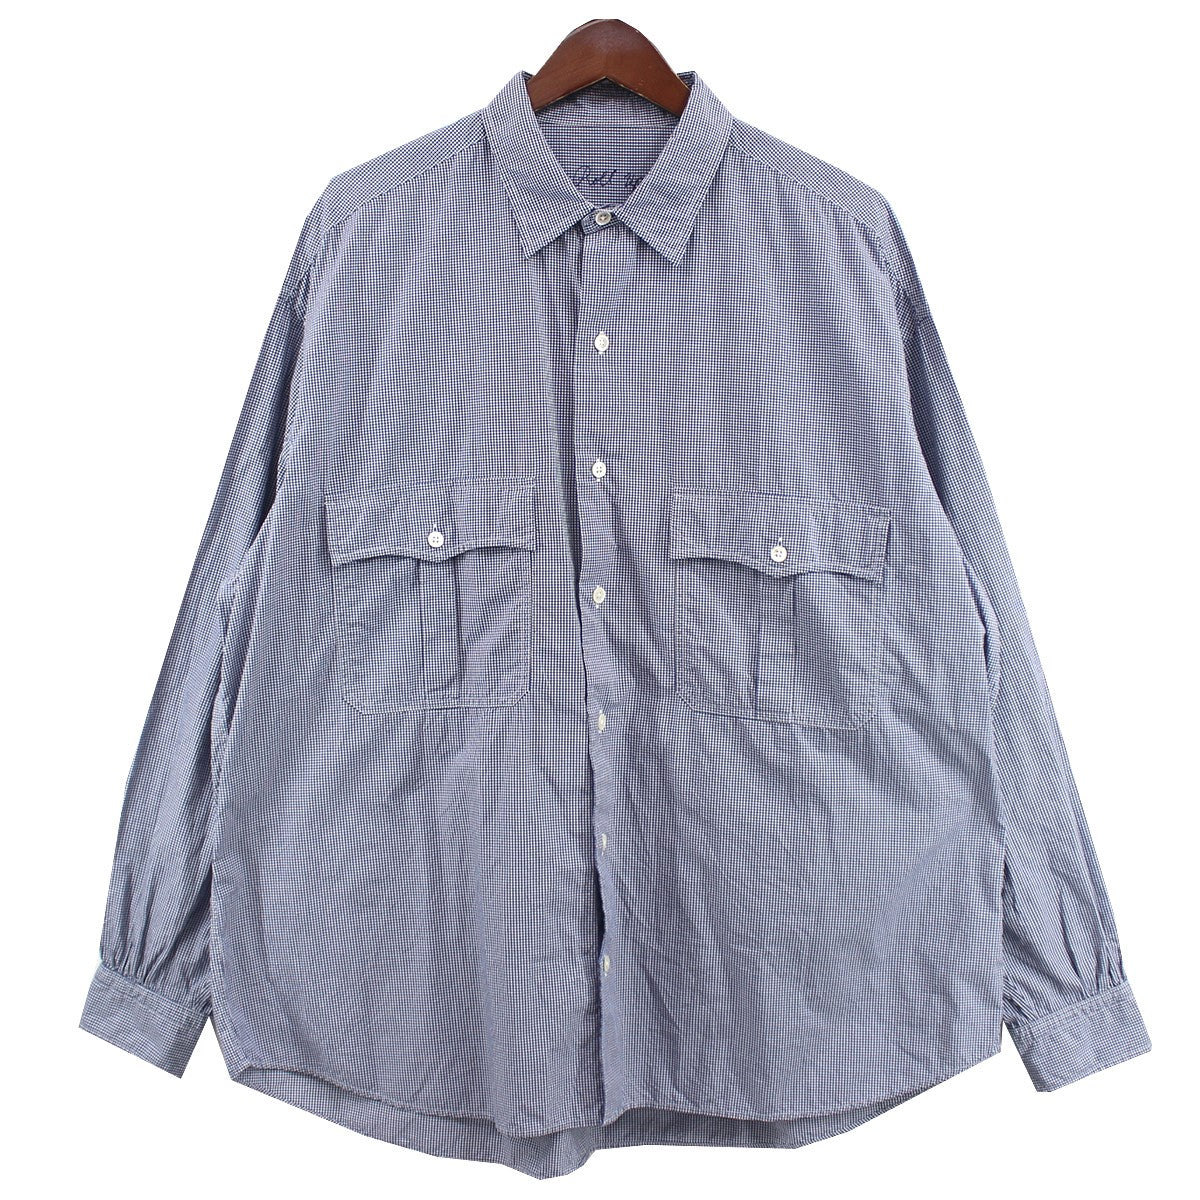 Porter Classic(ポータークラシック) ROLL UP NEW GINGHAM CHECK SHIRT 